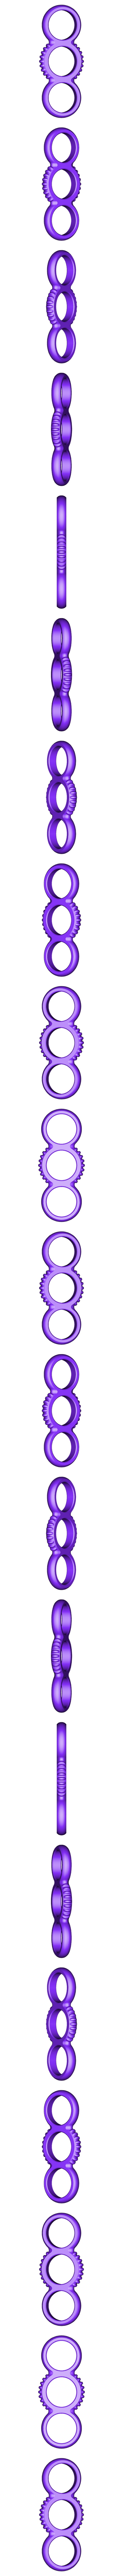 Spinner_Dual.stl Download free STL file Some Hand Spinners • 3D printer design, 87squirrels